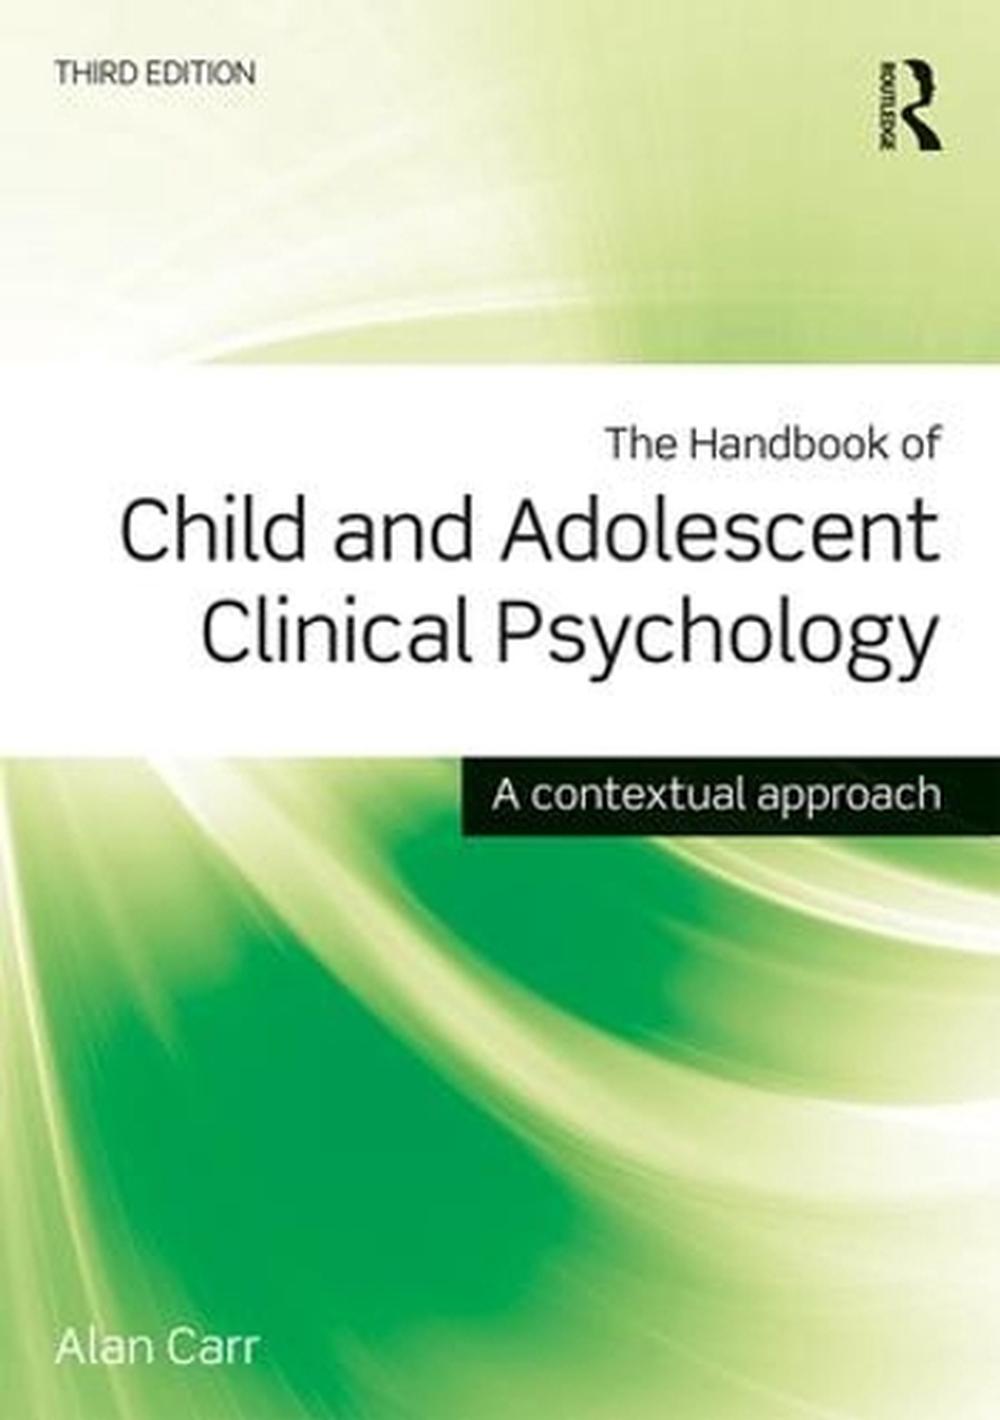 child psychology book review